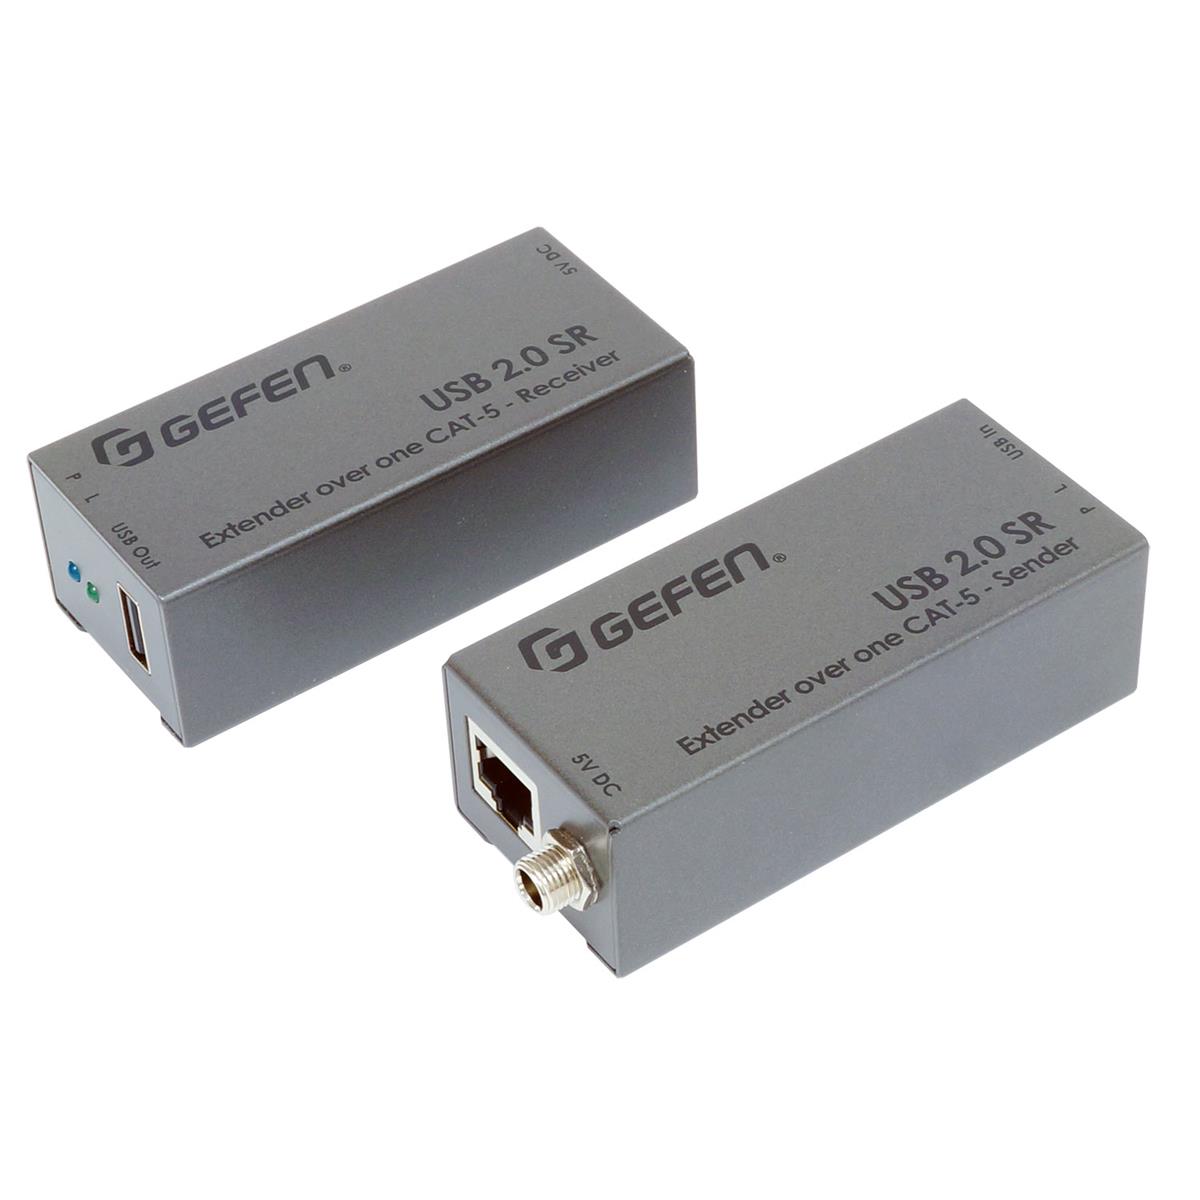 Photos - Other for Computer Gefen USB 2.0 SR Extender Over One CAT-5 Cable EXT-USB2.0-SR 